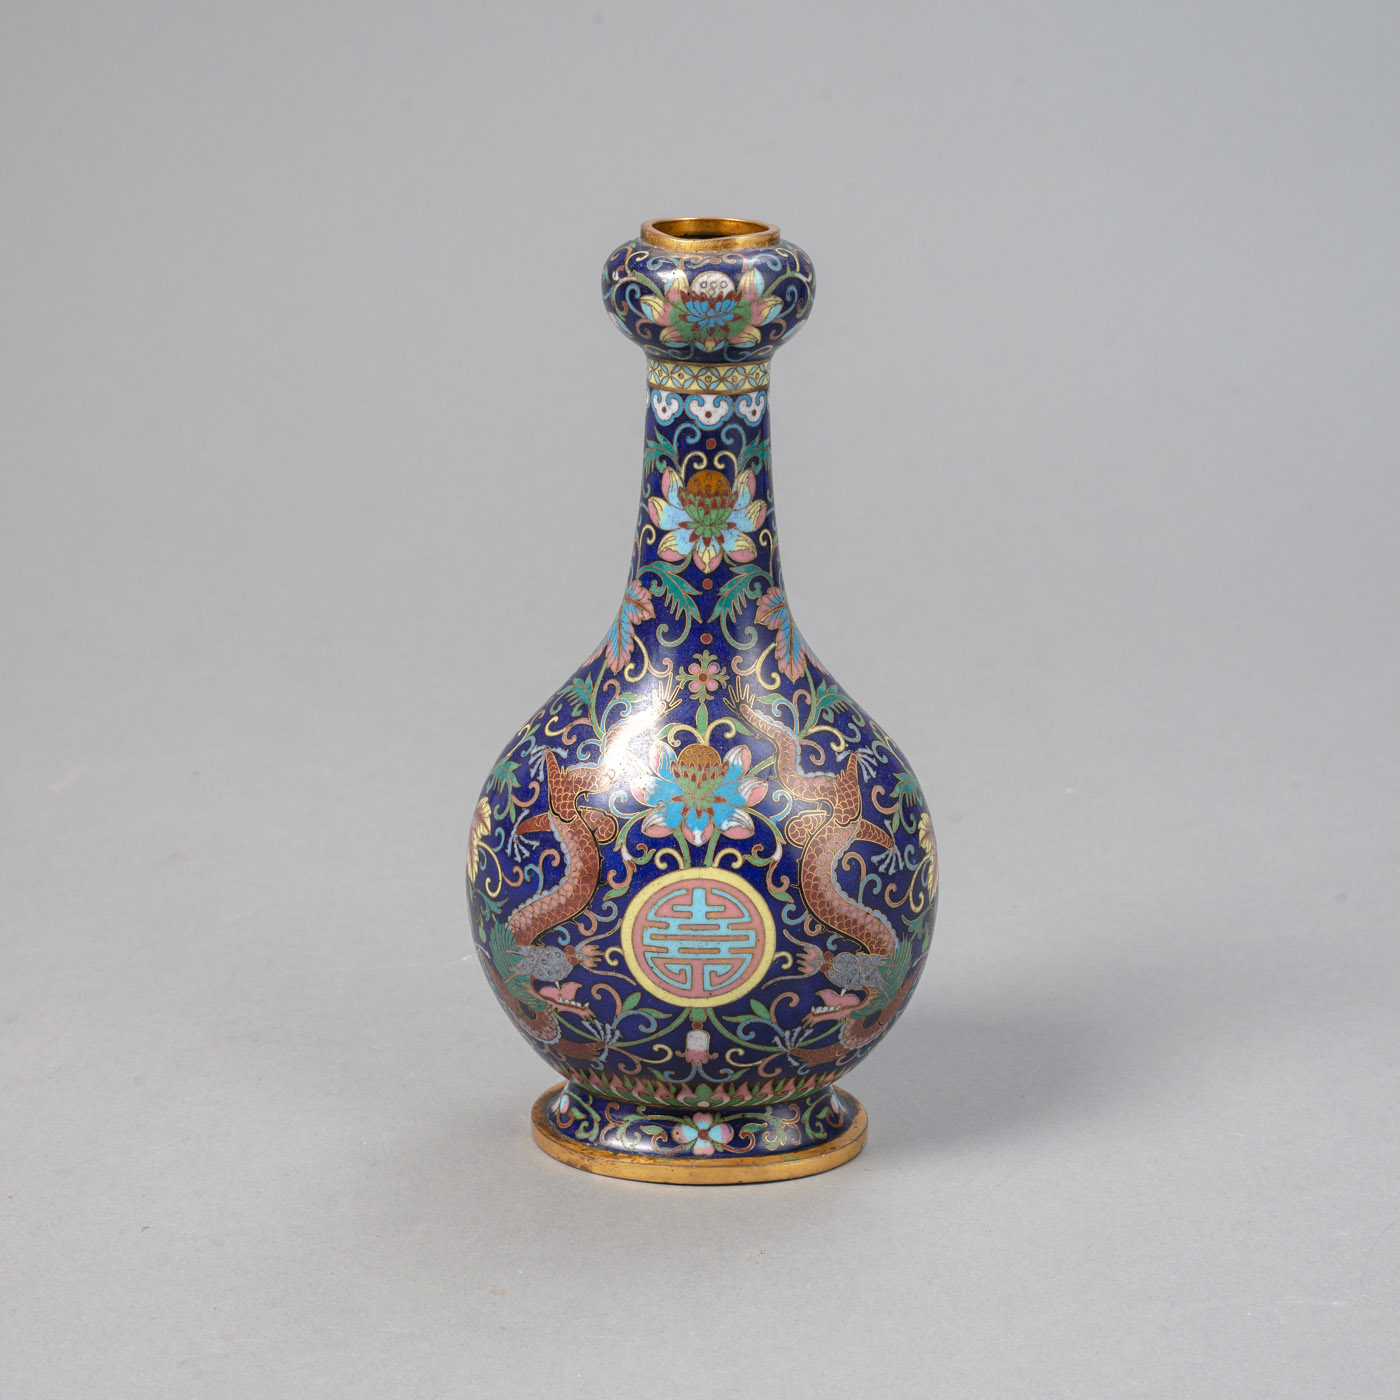 <b>A CLOISONNÉ GARLIC BOTTLE VASE DEPICTING TWO PAIRS OF DRAGONS, LOTUS AND 'SHOU' SIGNS ON A BLUE GROUND</b>